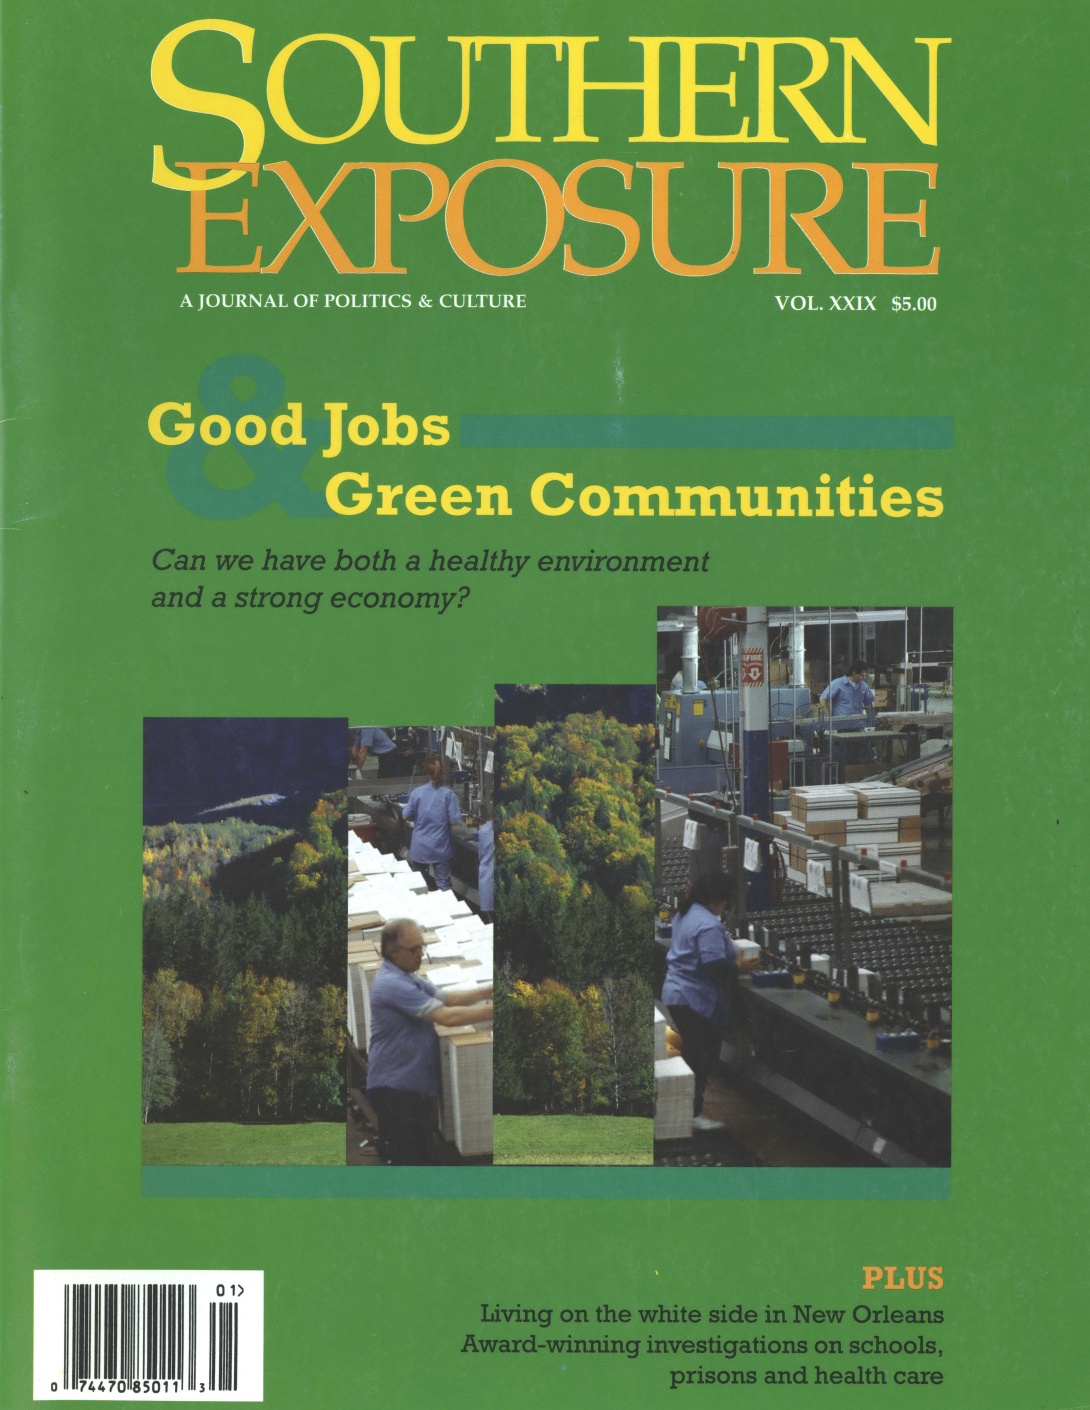 Magazine cover, photos of assembly lines and trees against green background. Text reads "Good Jobs & Green Communities: Can we have both a healthy environment and a strong economy?"